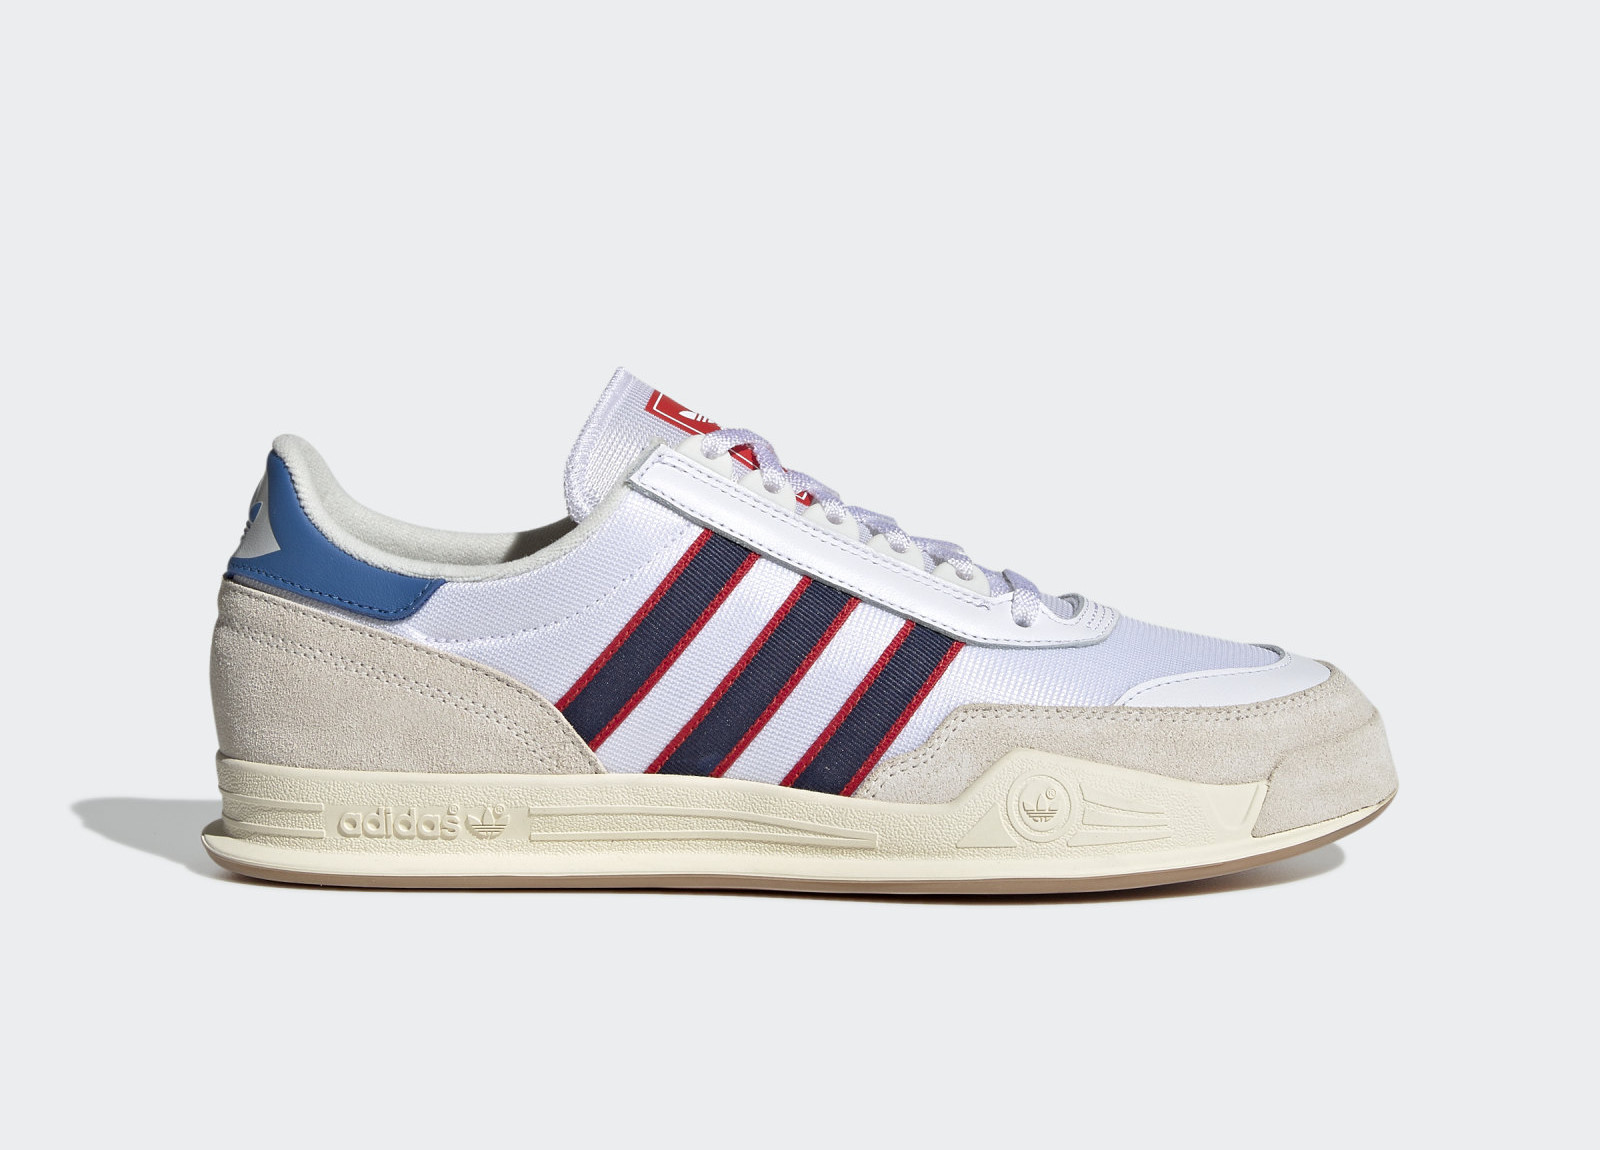 Adidas CT86
White / Blue / Red